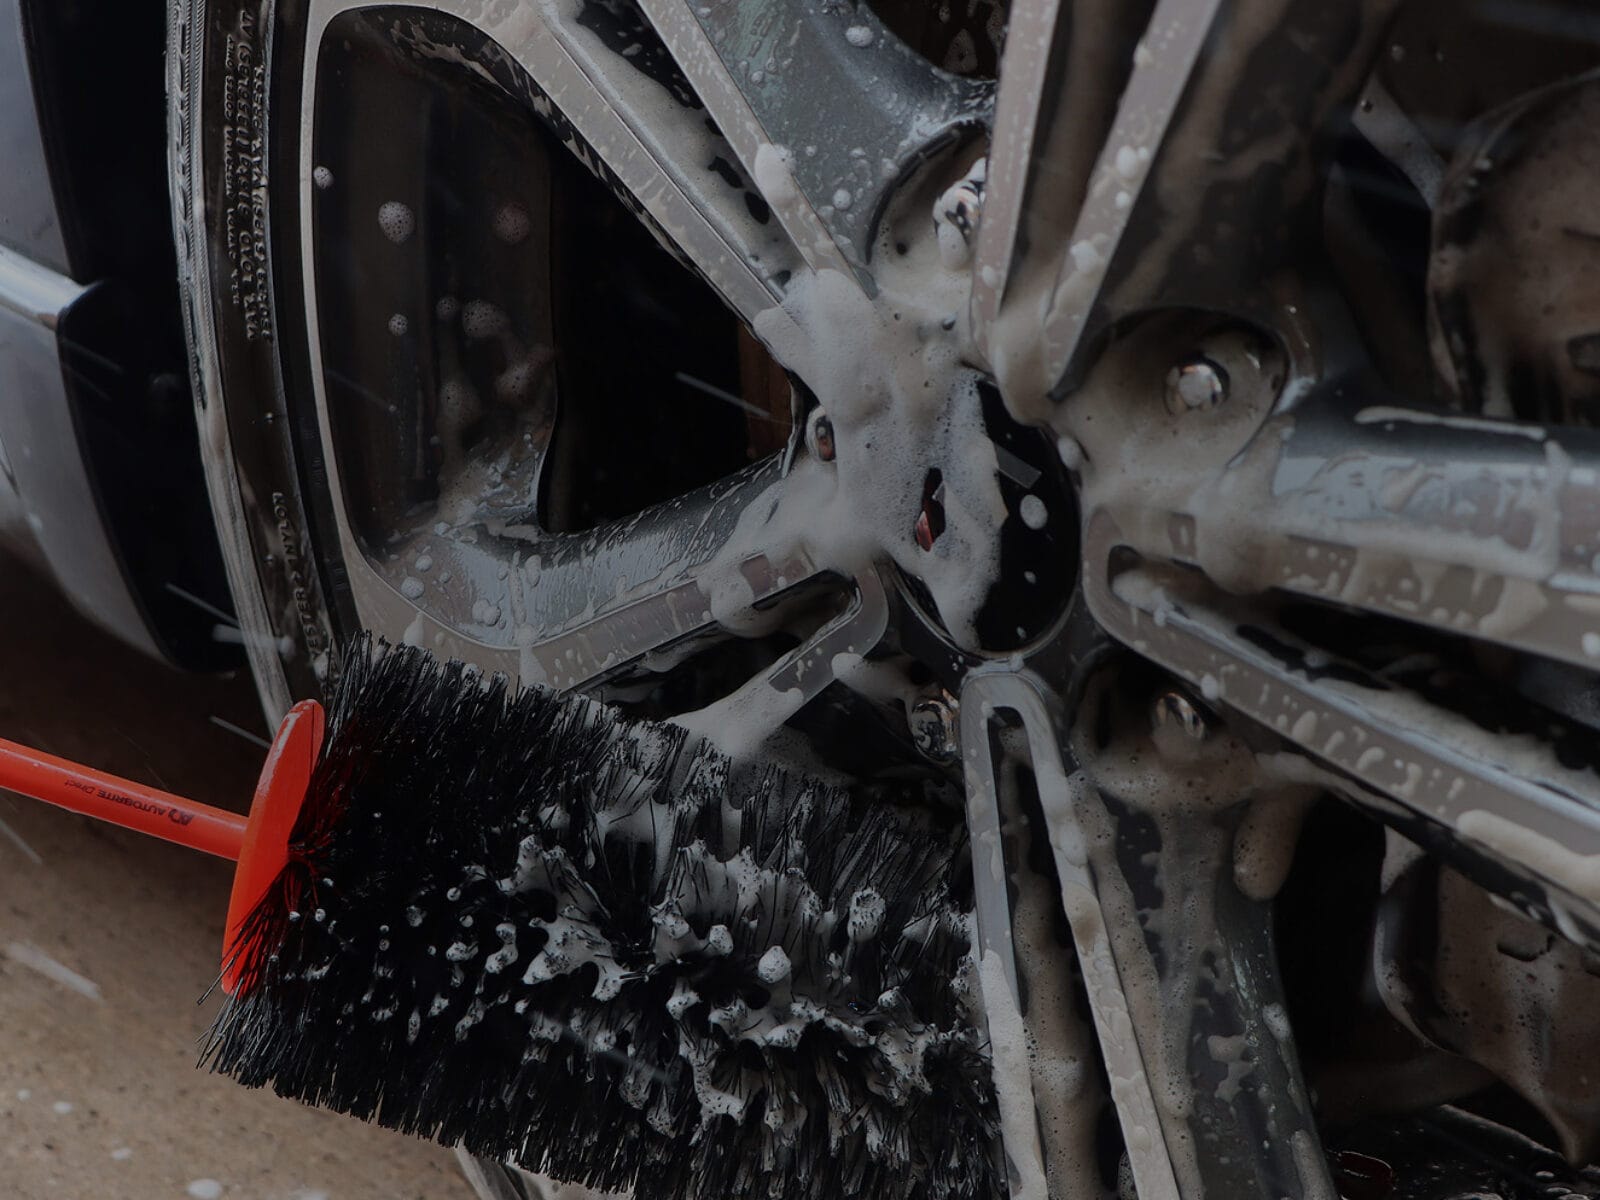 wheel cleaning